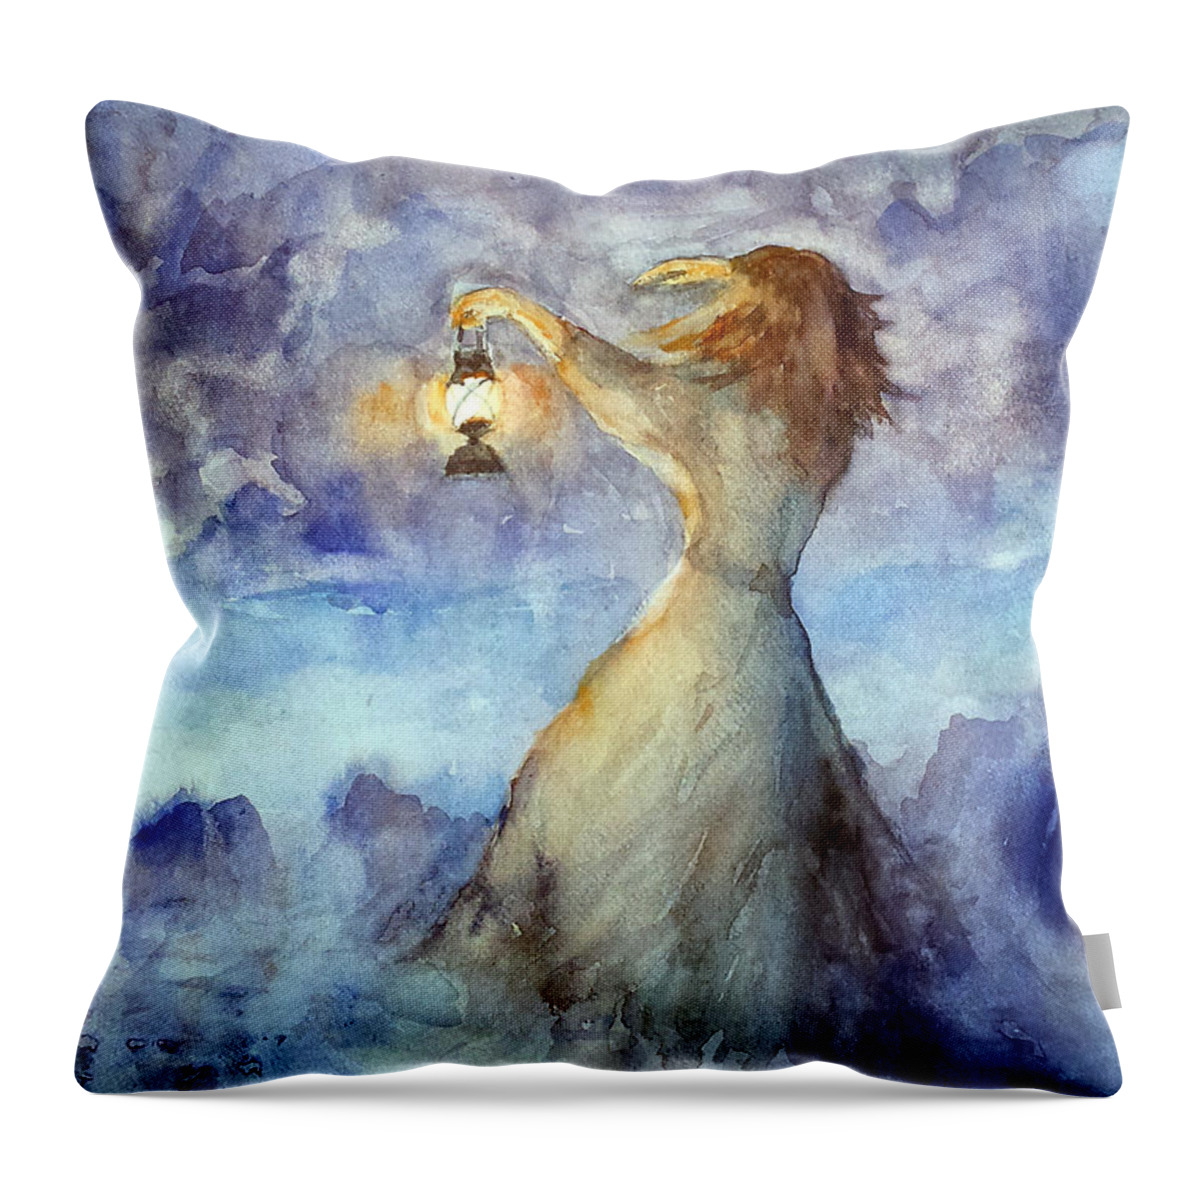 Night Throw Pillow featuring the painting Storm... by Faruk Koksal